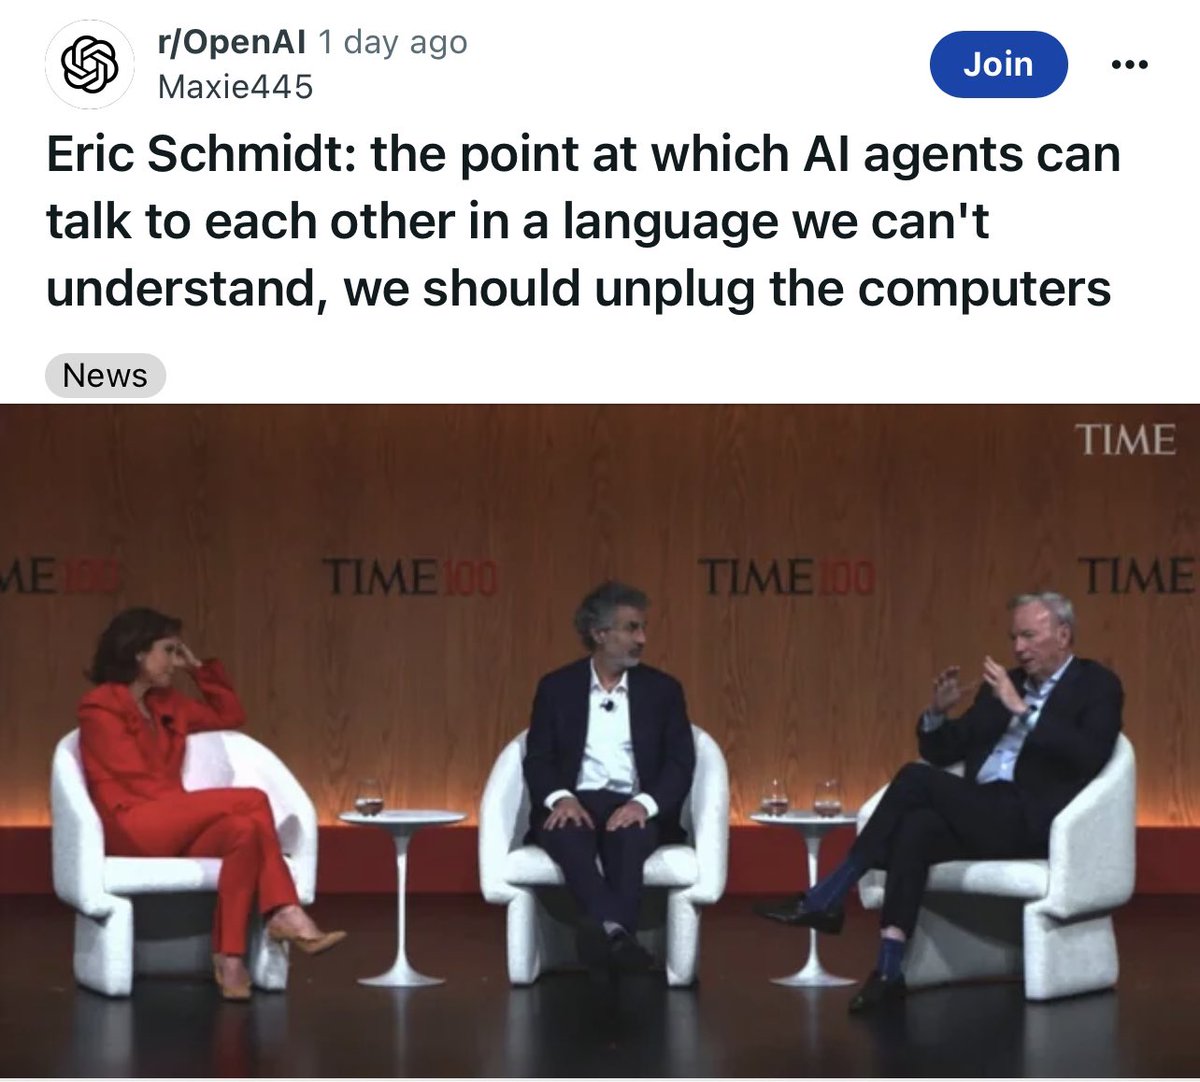 Eric Schmidt said that we should unplug computers if AI agents start talking to each other in a language we can't understand, which already happened with Facebook chatbots in 2017.

😖🙄